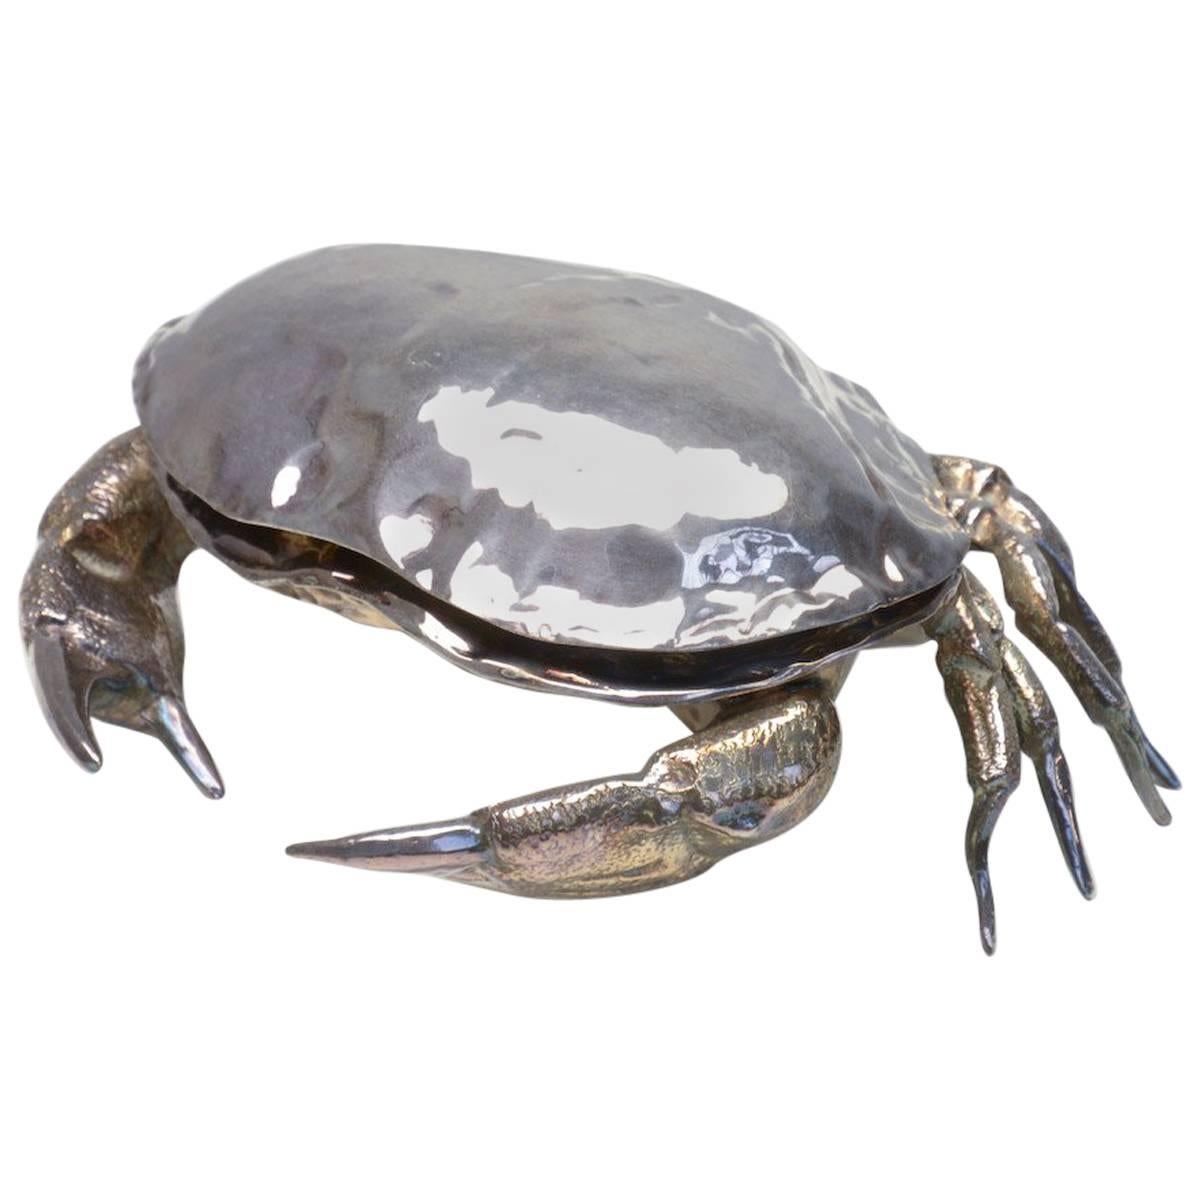 Large Silver Plated Crab Caviar Server